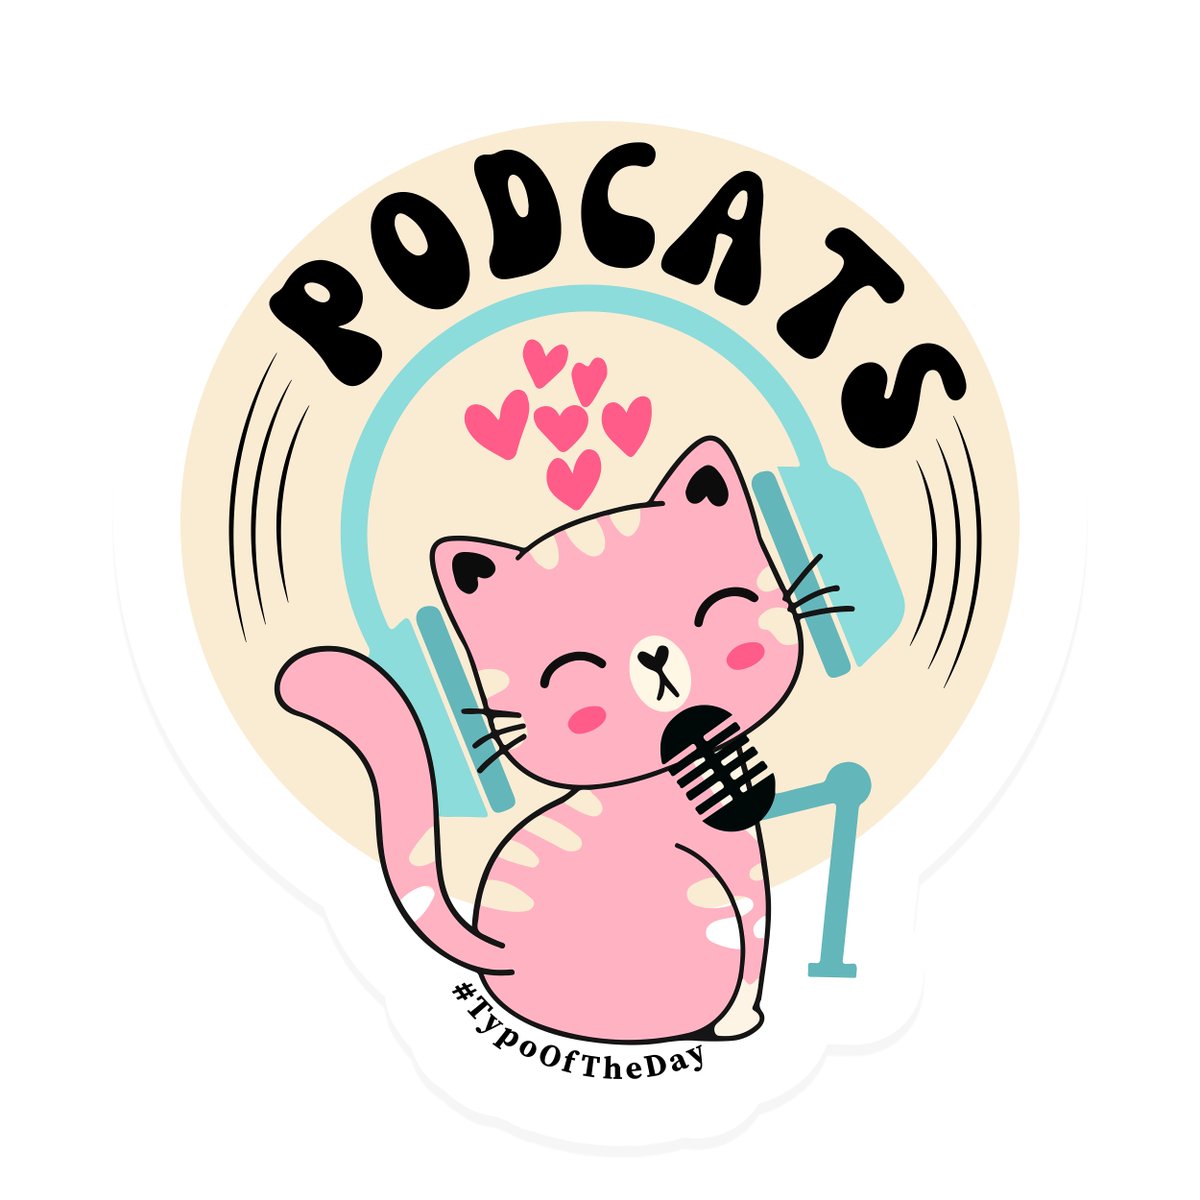 We’re excited to share the launch of a new Python focused podcast: The Hidden Figures of Python by the @pypodcats 🐍🎙️🐈 we look forward to hearing inspiring stories from our wonderful community! #python bit.ly/3tcVwxA